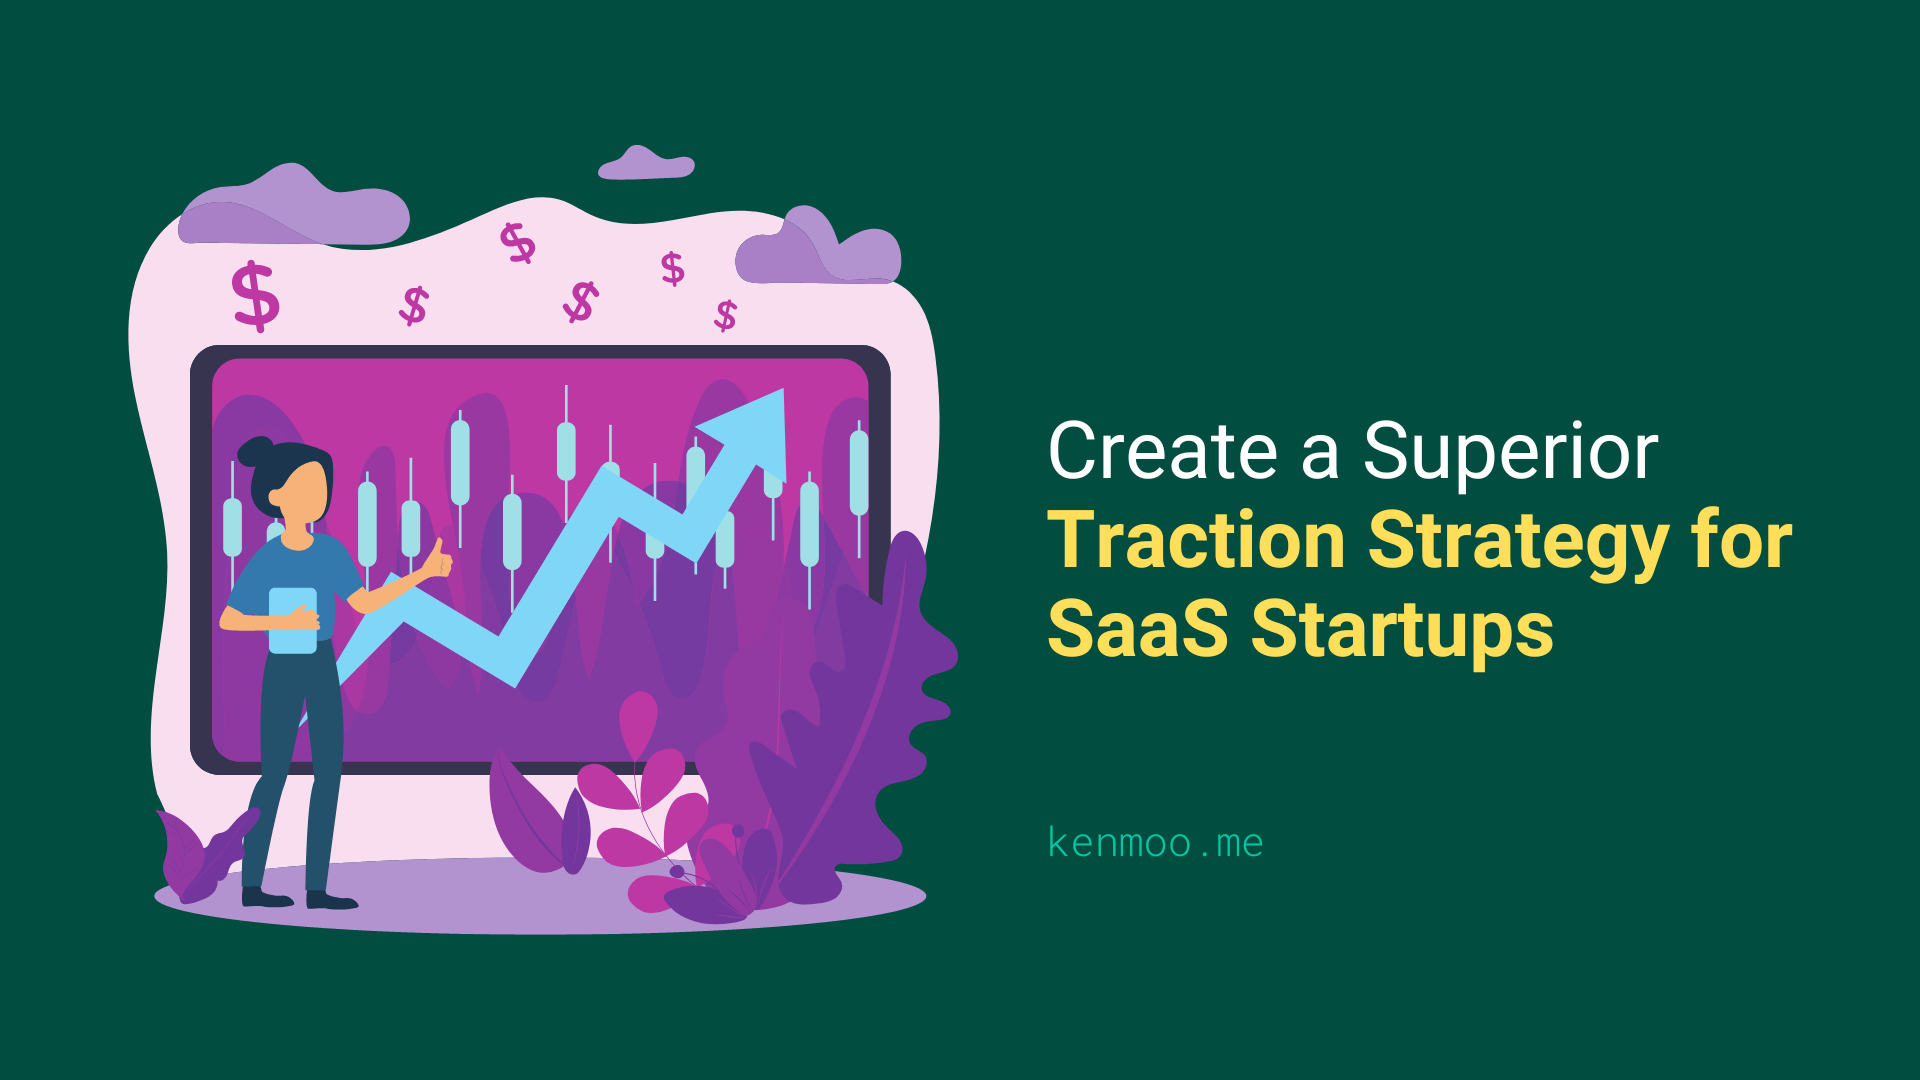 Create a Superior Traction Strategy for SaaS Startups